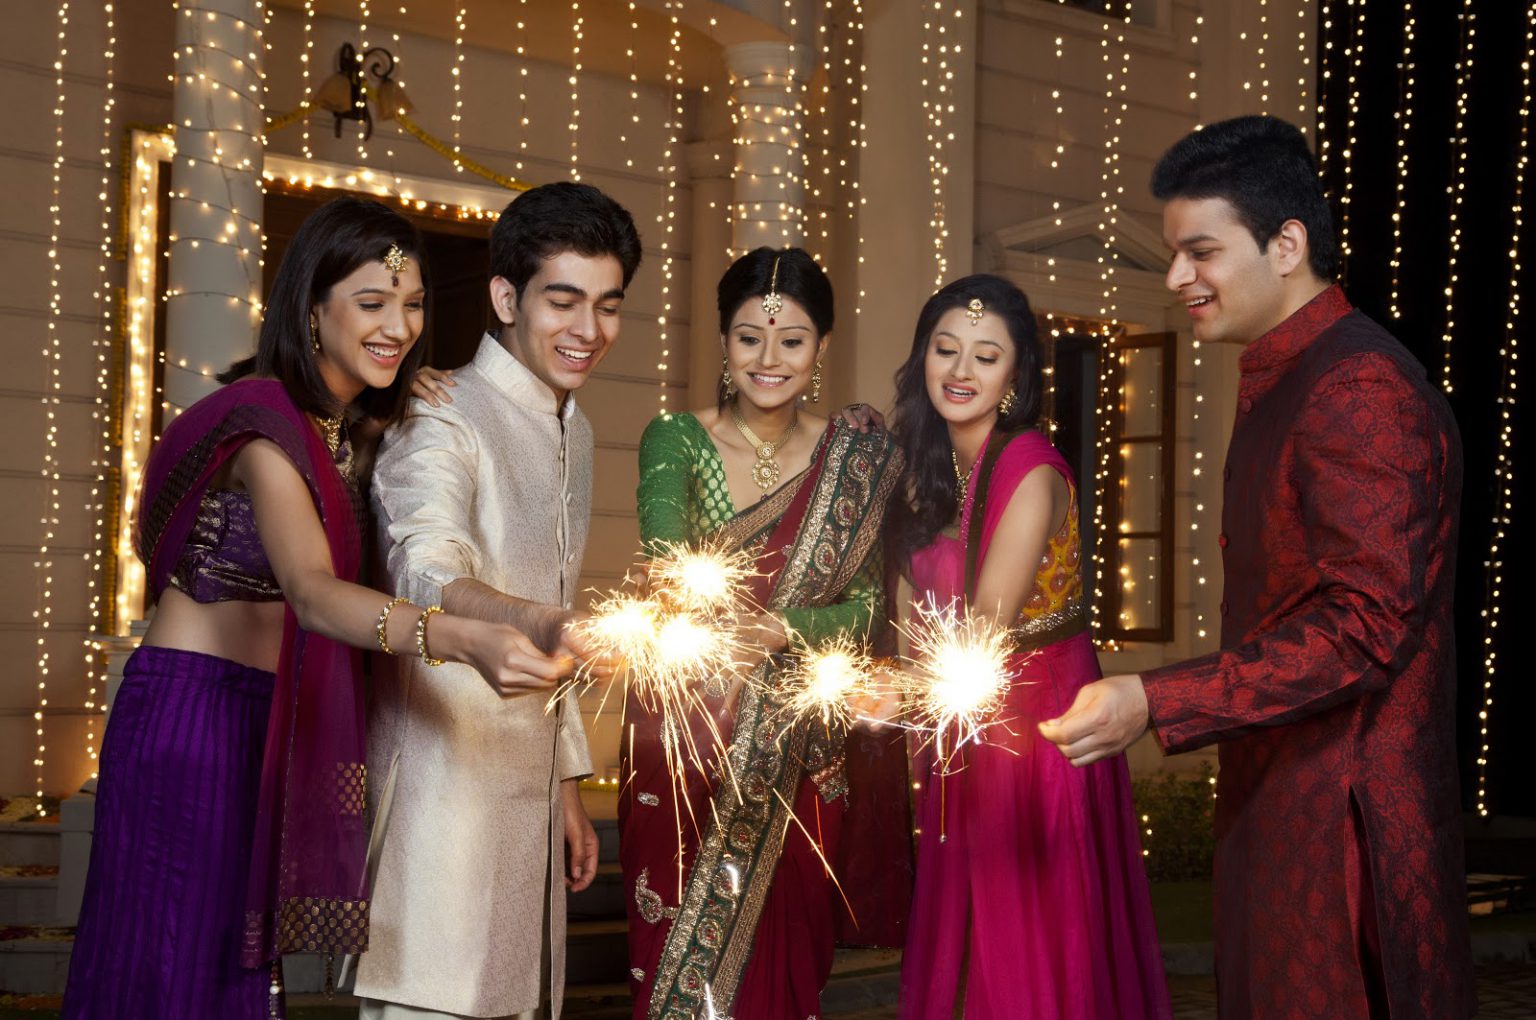 It's Lit! Dazzling Diwali Party Ideas Your Guests Will Love STATIONERS